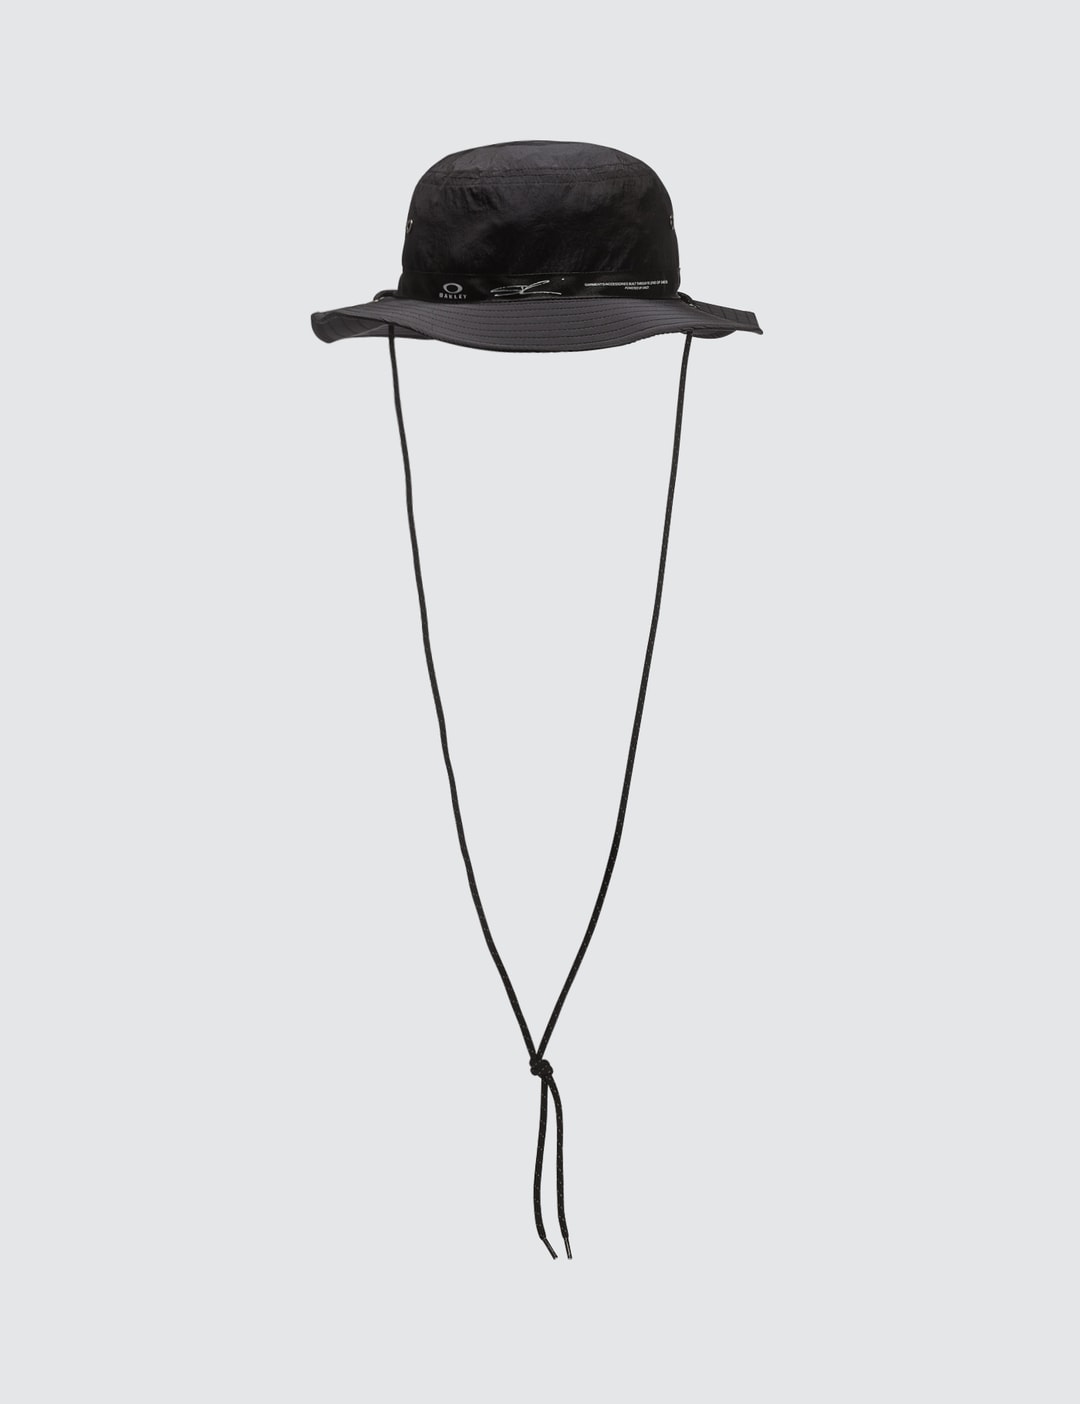 Oakley by Samuel Ross - Boonie Bucket Hat | HBX - Globally Curated ...